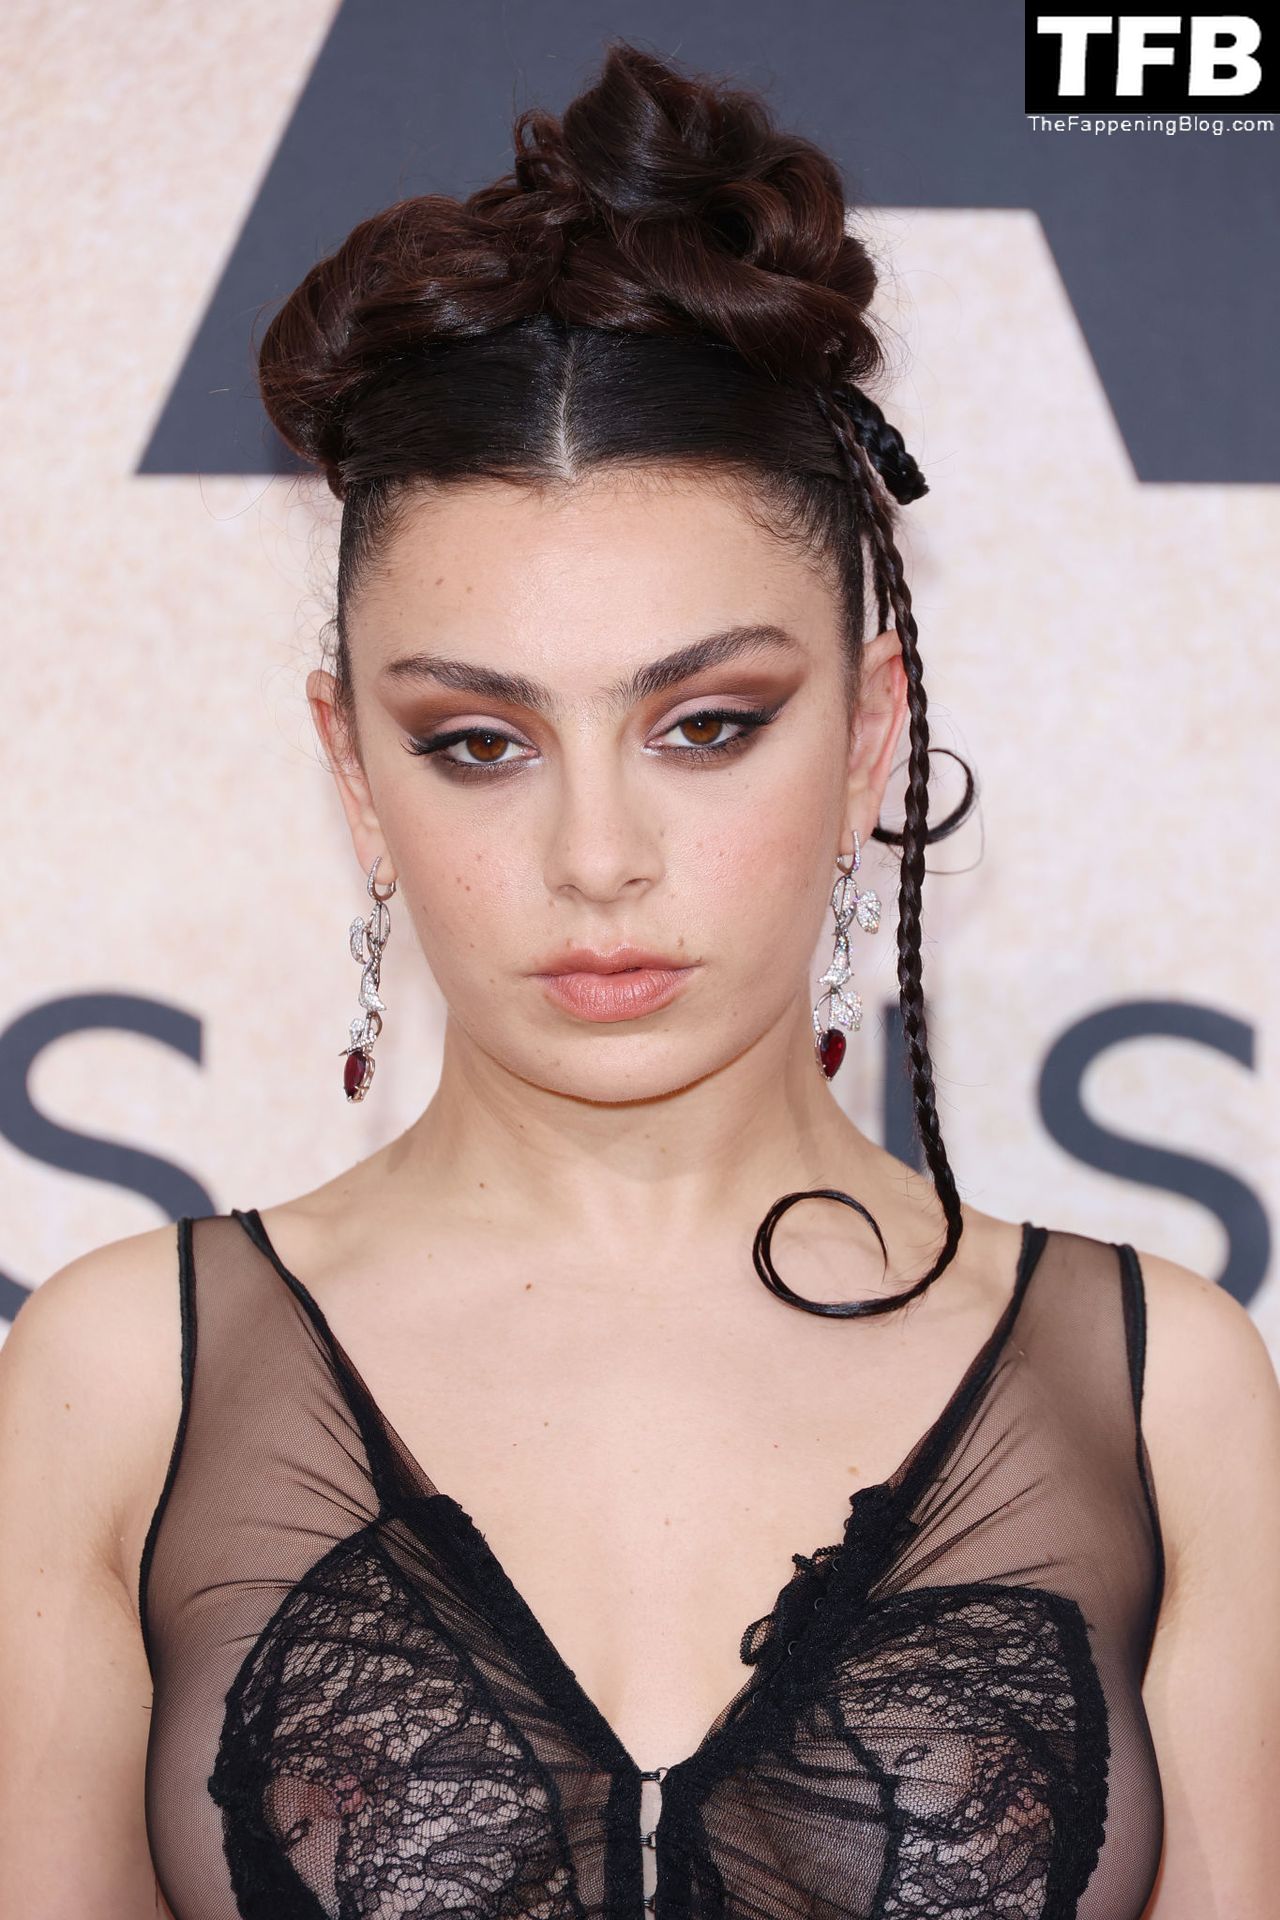 Charli-XCX-See-Through-Nude-The-Fappening-Blog-42.jpg